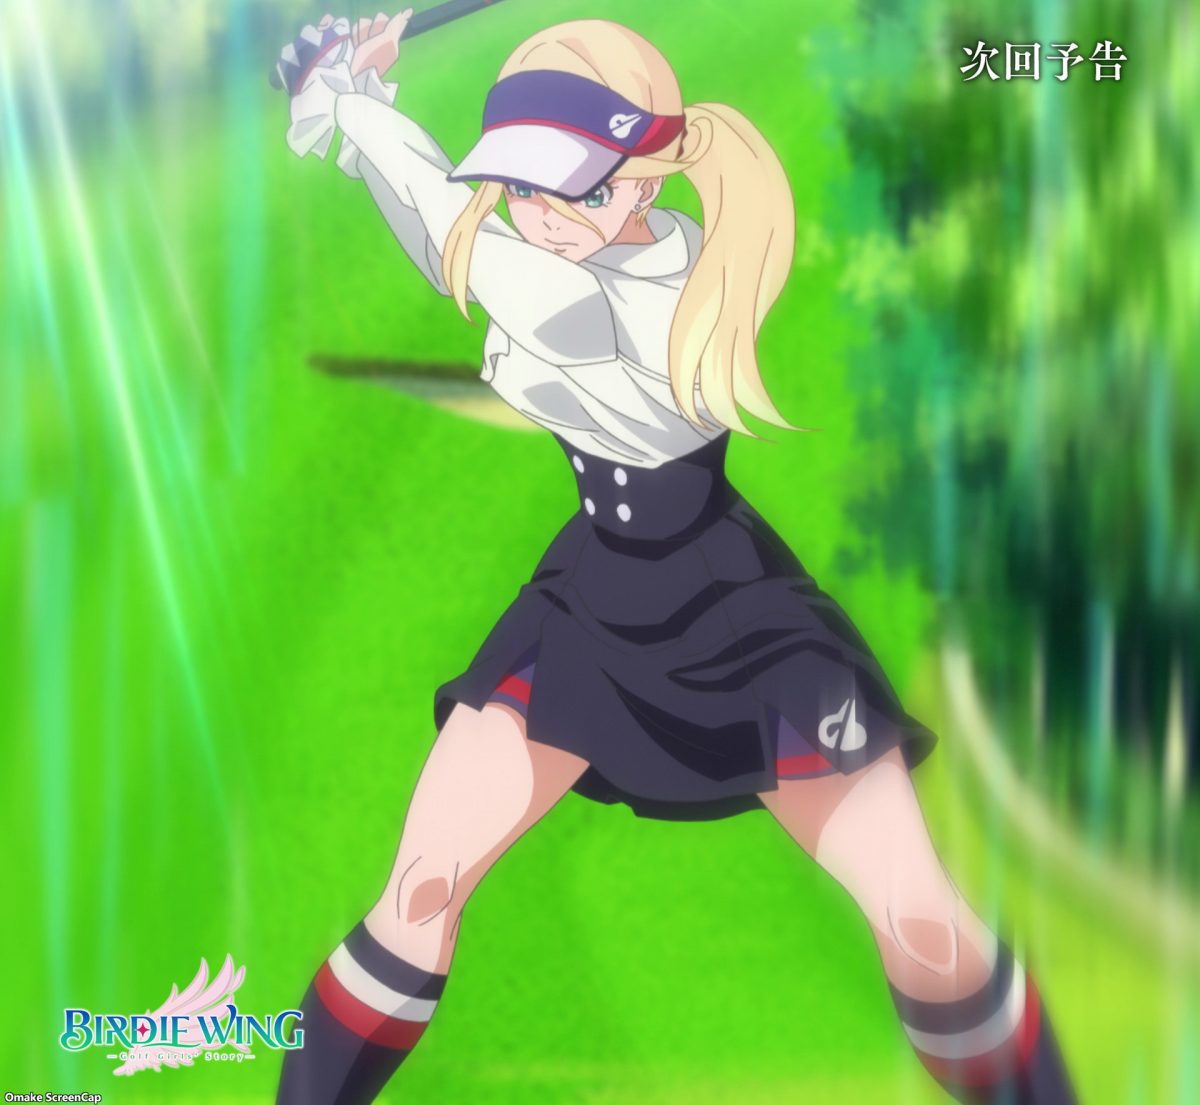 Birdie Wing Golf Girls' Story Episode 2 Preview Eve Backswing